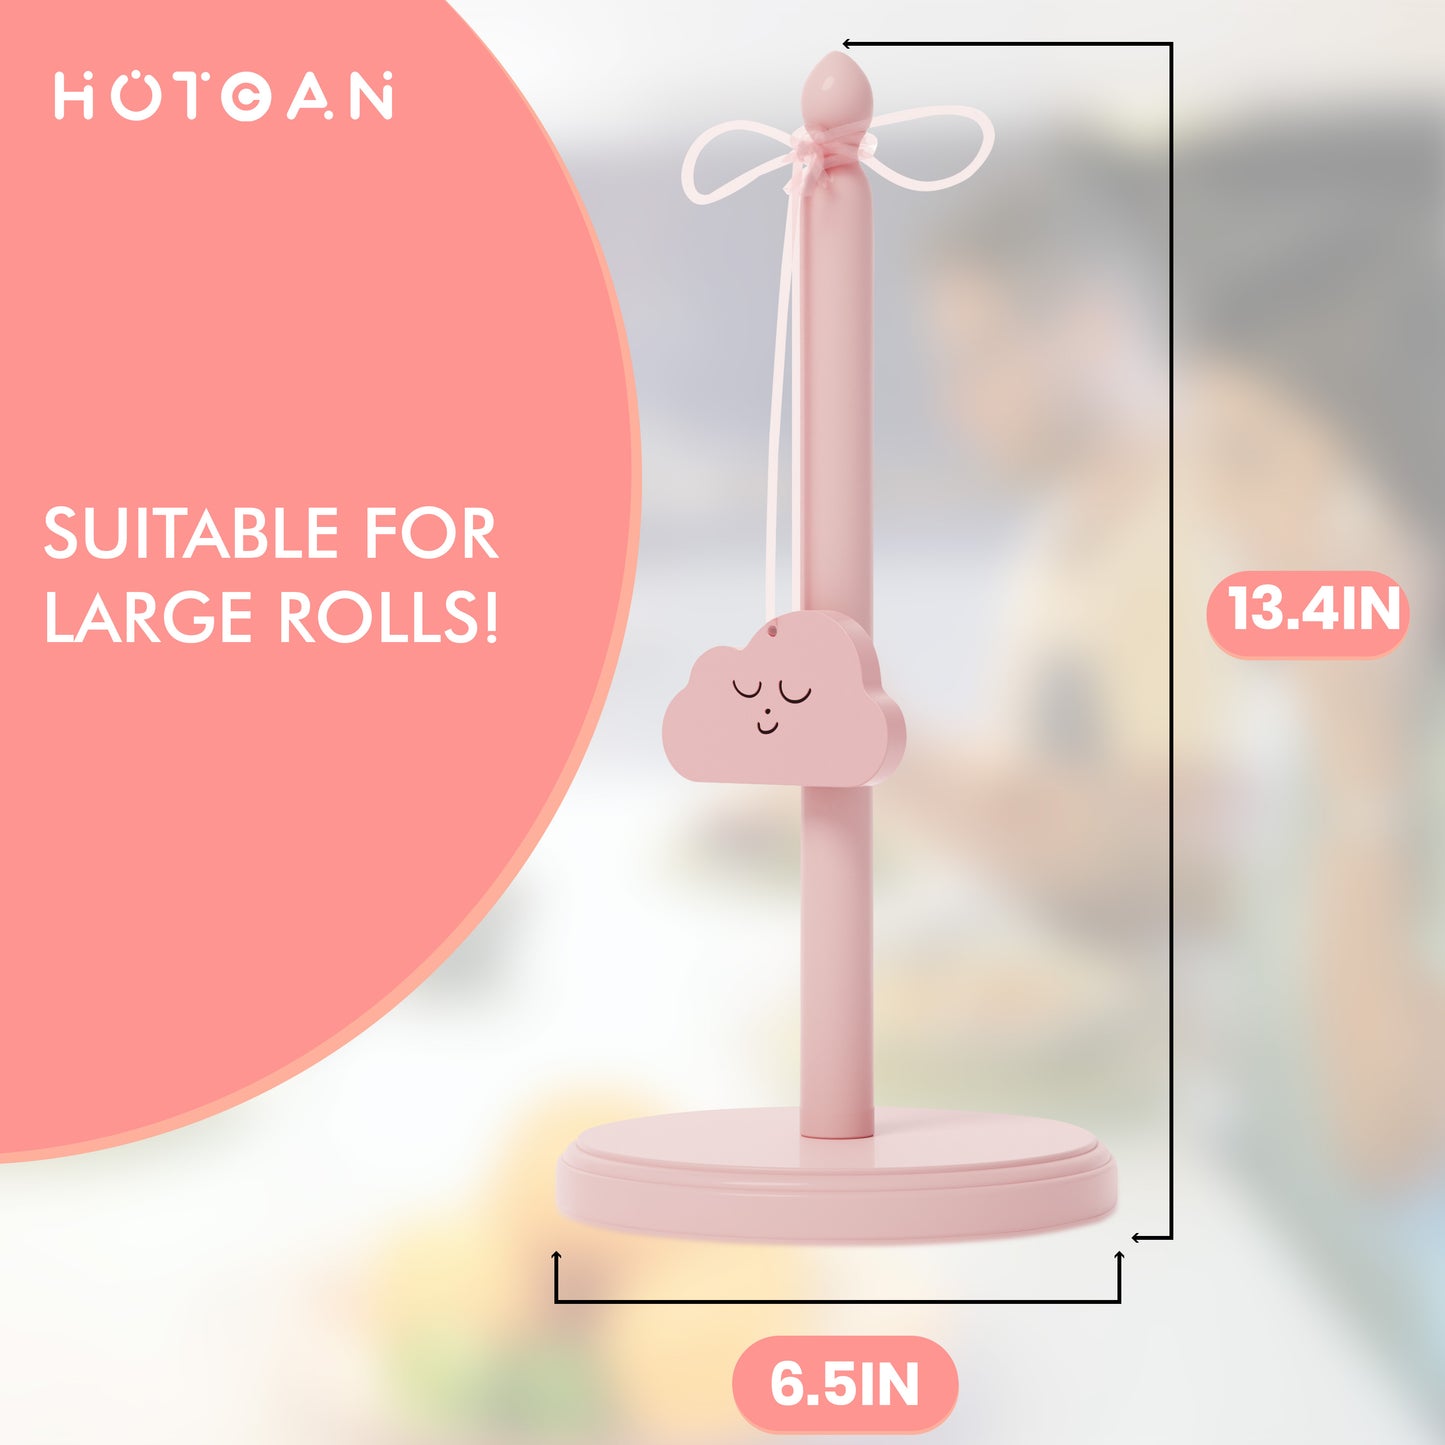 HOTCAN Pink Paper Towel Holder for Countertop, Cute Paper Towel Holder with Beer Bottle Opener, Pink Kitchen Accessories Made of Beech Wood, Pink Home Decor, Windproof Design for Outdoor Use